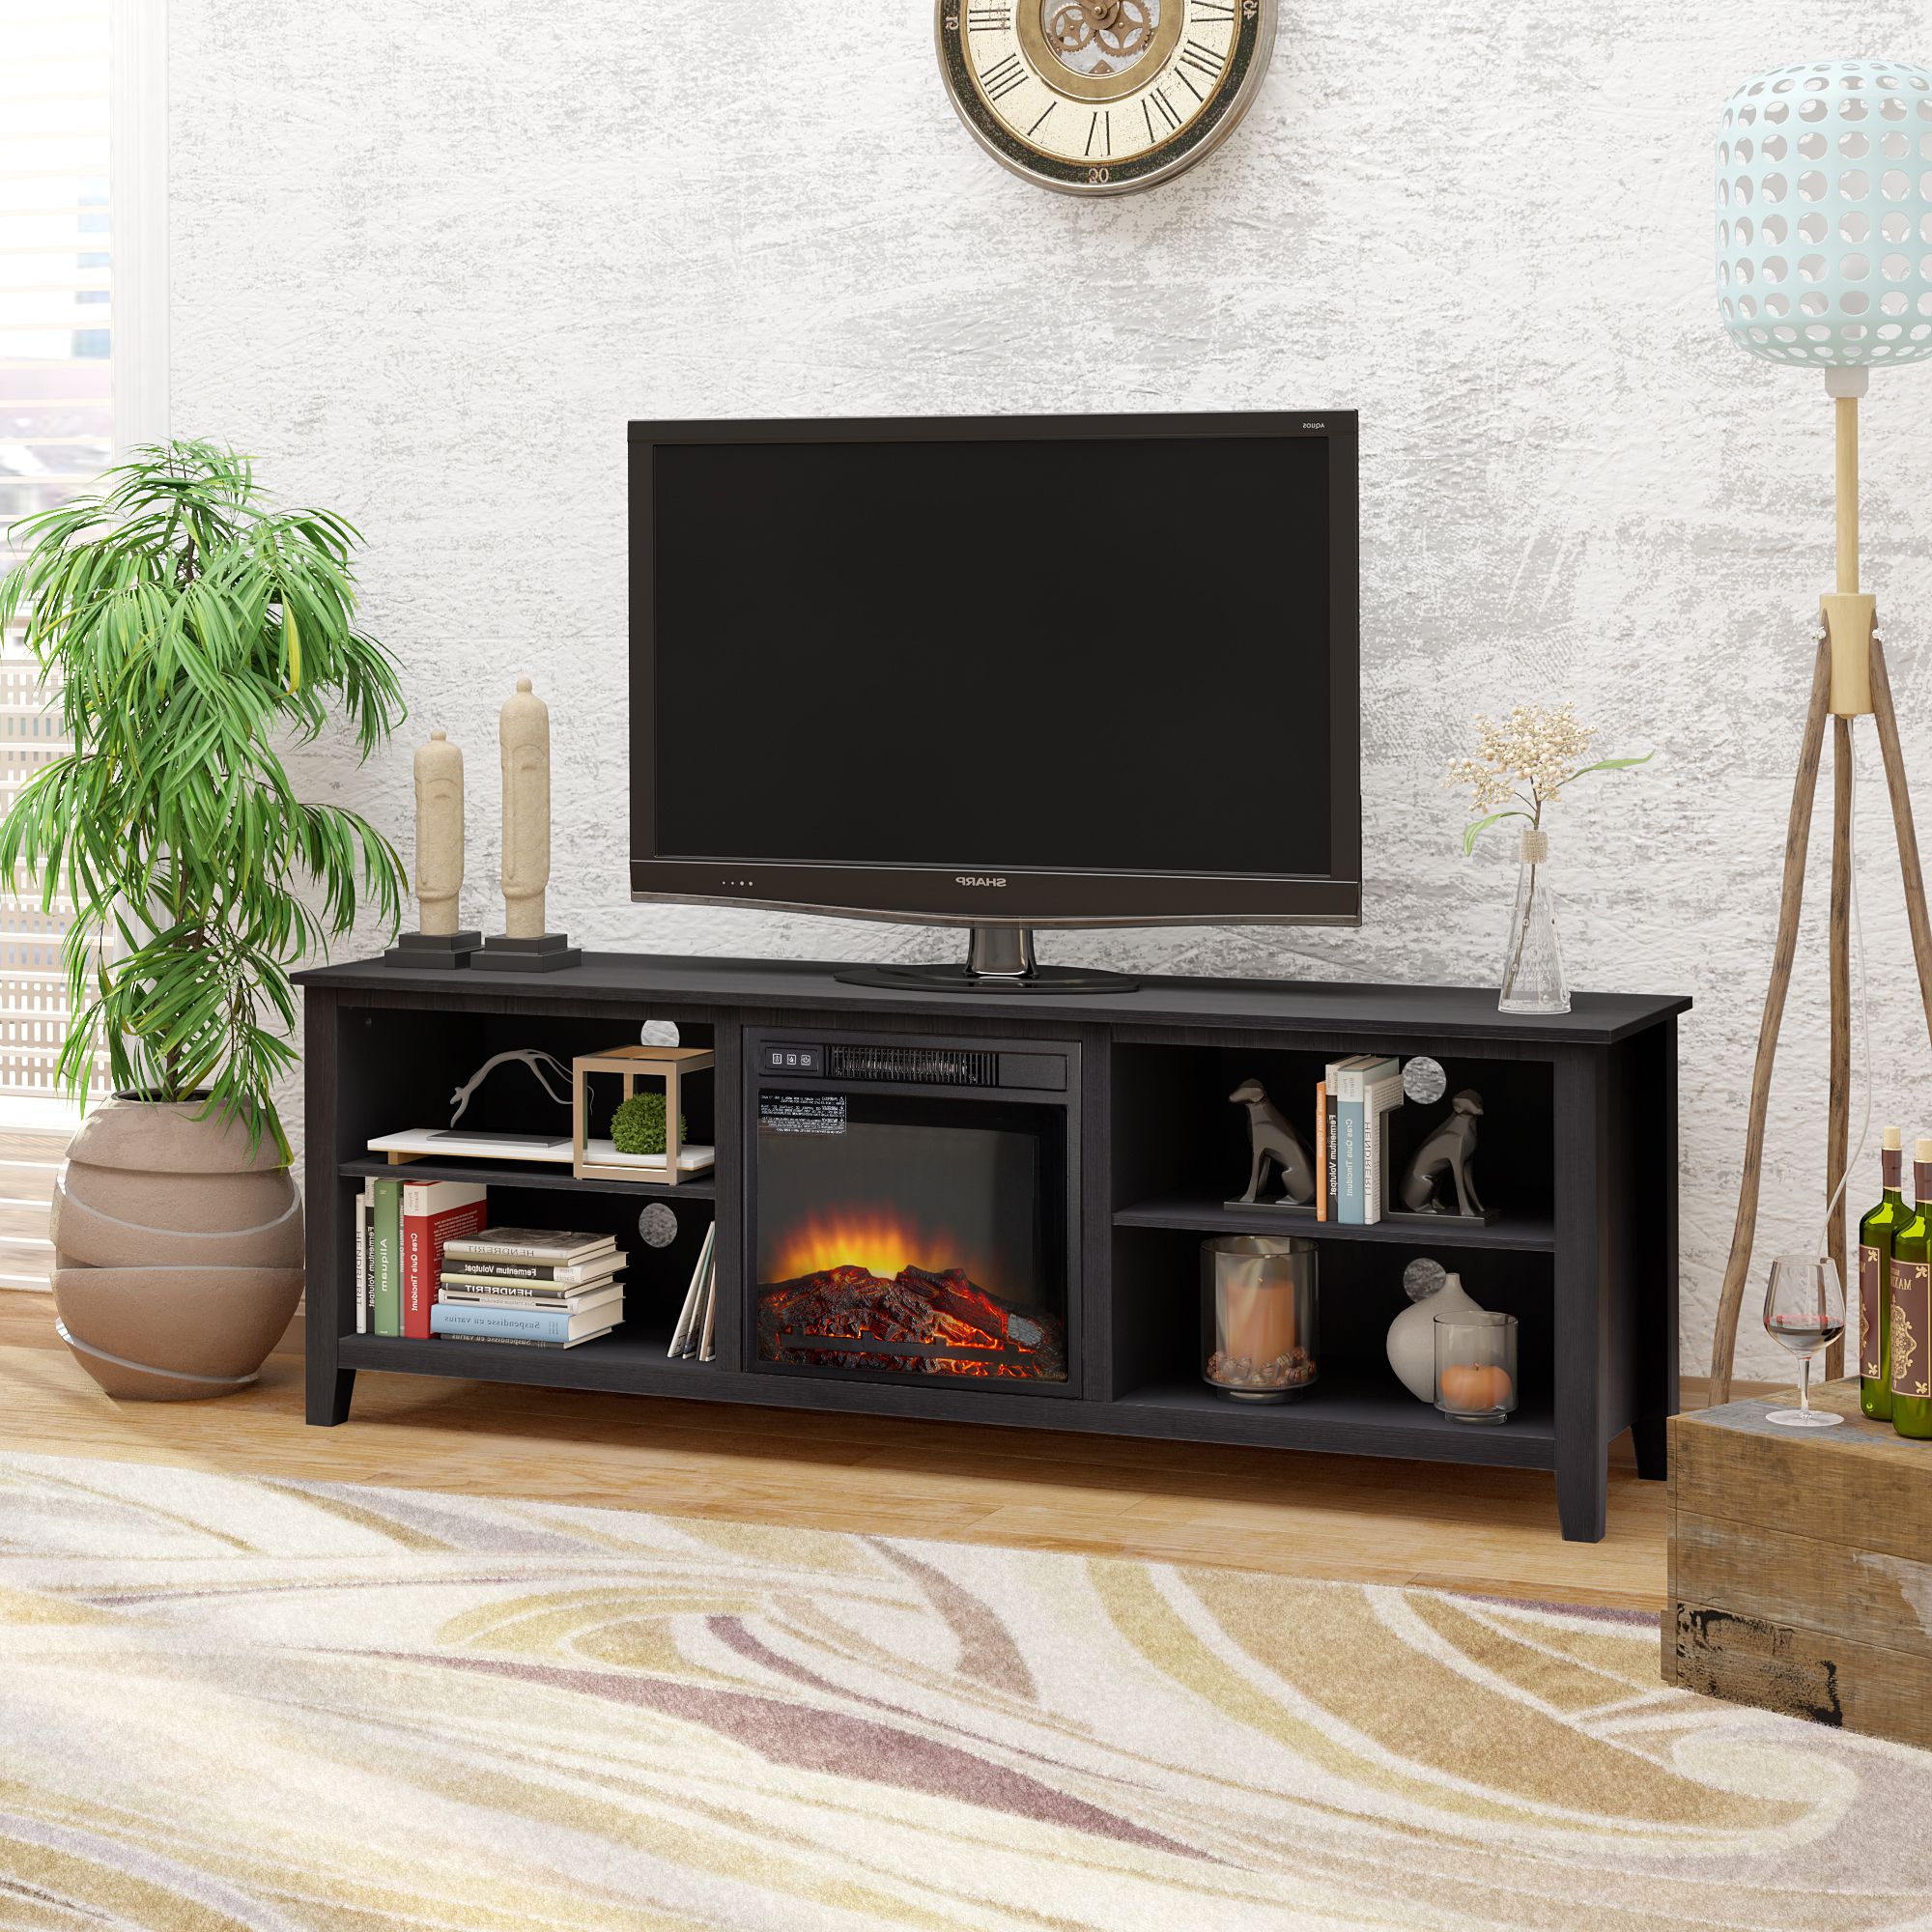 70" Tv Stand Fireplace Media Console For Tvs Up To 80 Within Fashionable Glass Tv Stands For Tvs Up To 70" (View 2 of 10)